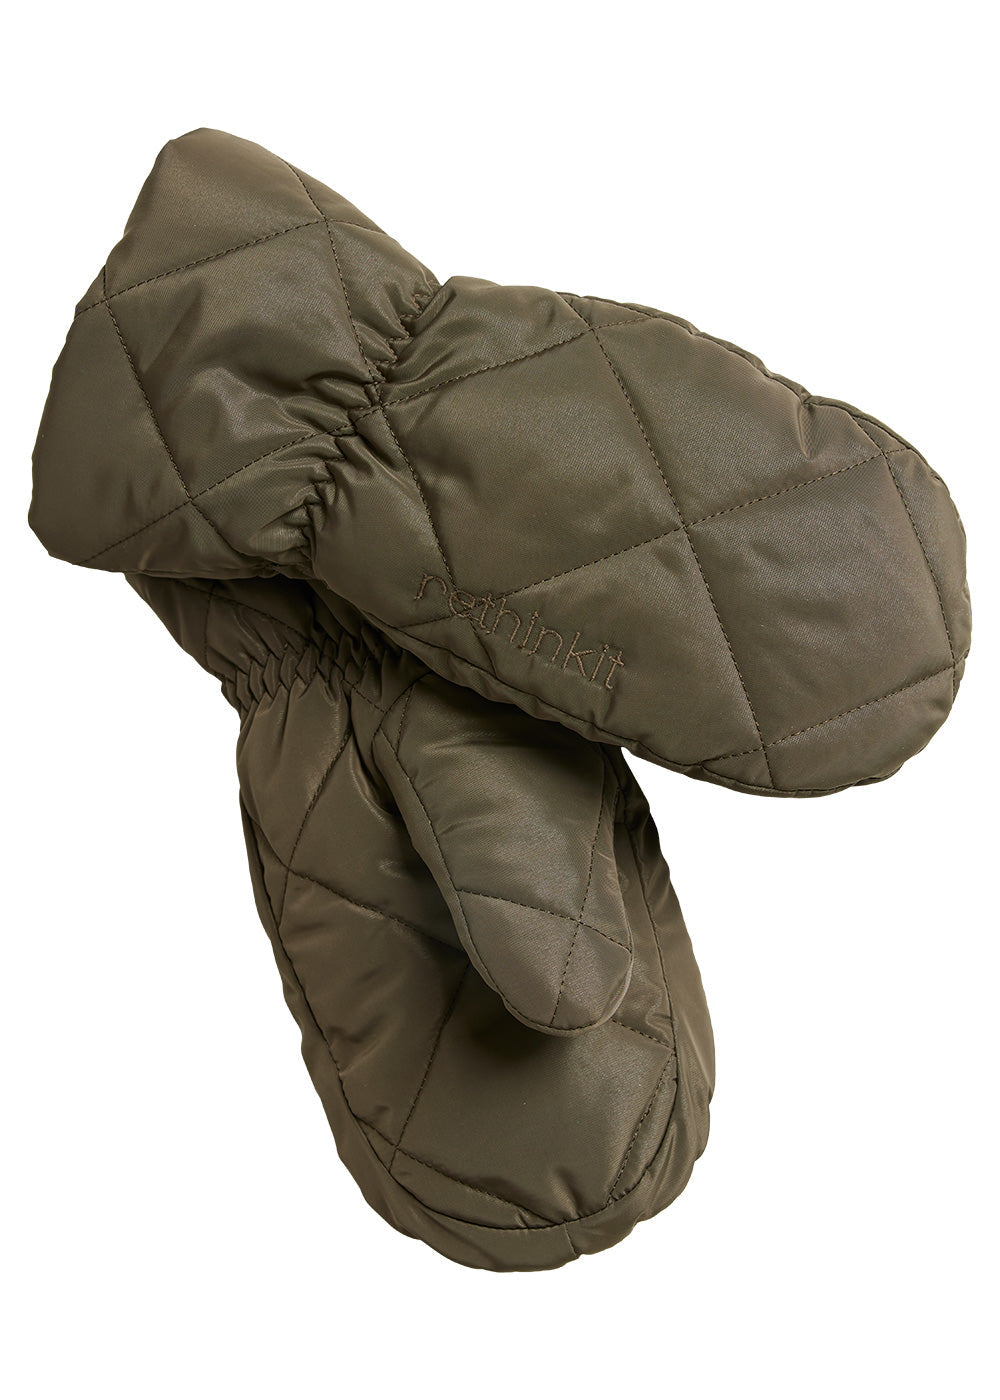 Rethinkit - Quilted Gloves Country - Green Turtle